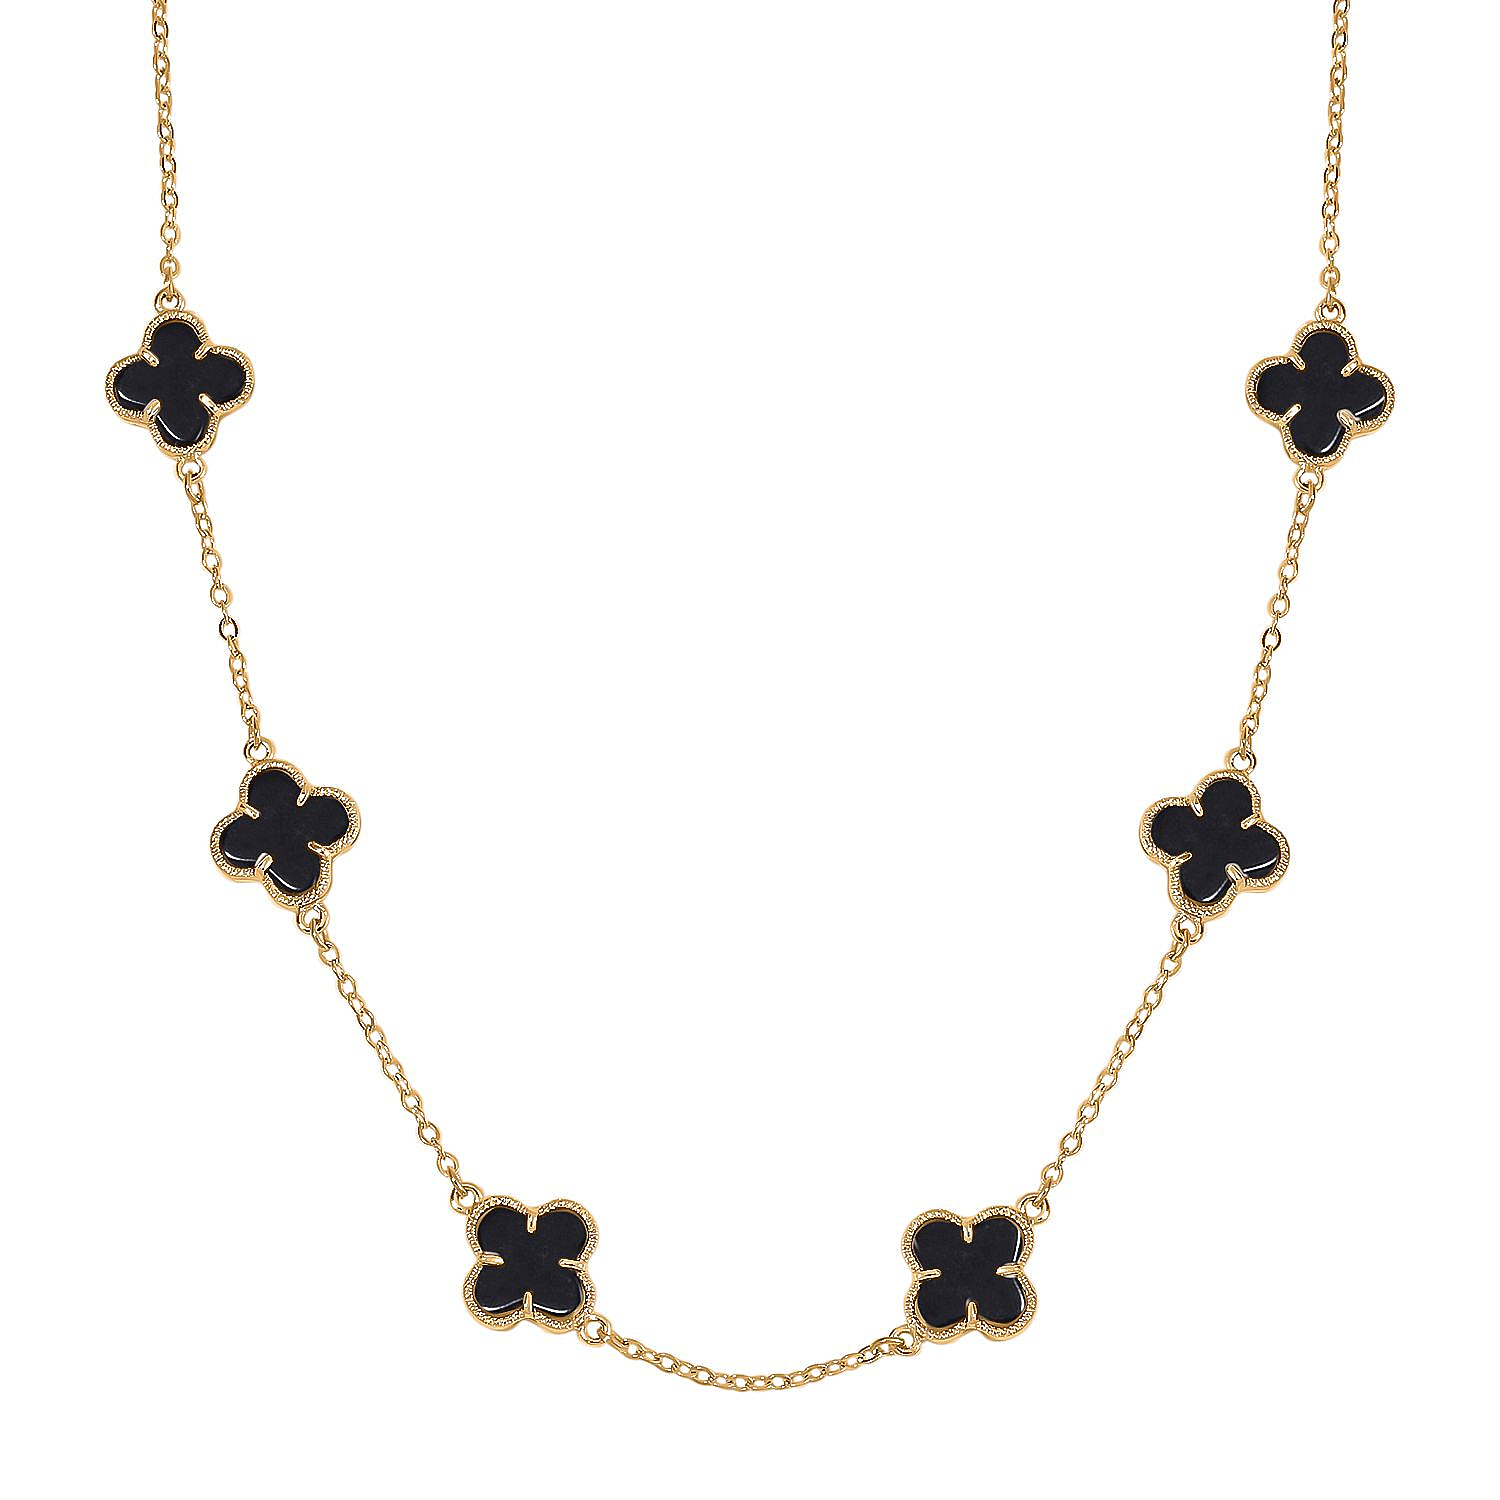 One Time Closeout - Designer Inspired Black Agate Clover Motifs Necklace (Size - 20) in Yellow Gold Tone